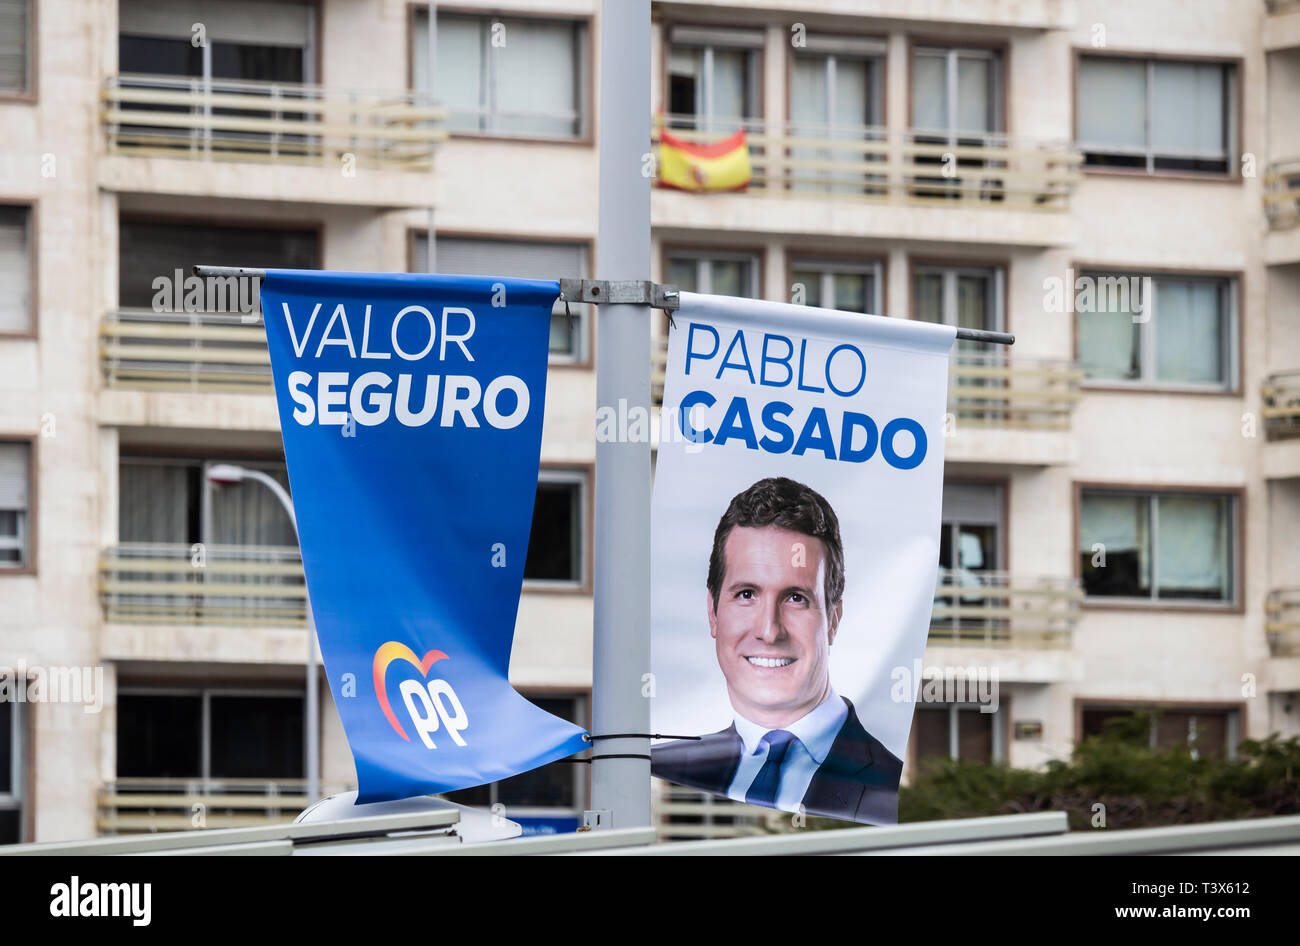 Las Palmas, Gran Canaria, Canary Islands, Spain. 12th April 2019. Election posters adorn the streets of Las Palmas on the first day of campaigning ahead of the general election in Spain on 28th April 2019. PICTURED: Campaign poster for Pablo Casado, leader of the PP party. Credit: ALAN DAWSON/Alamy Live News Stock Photo